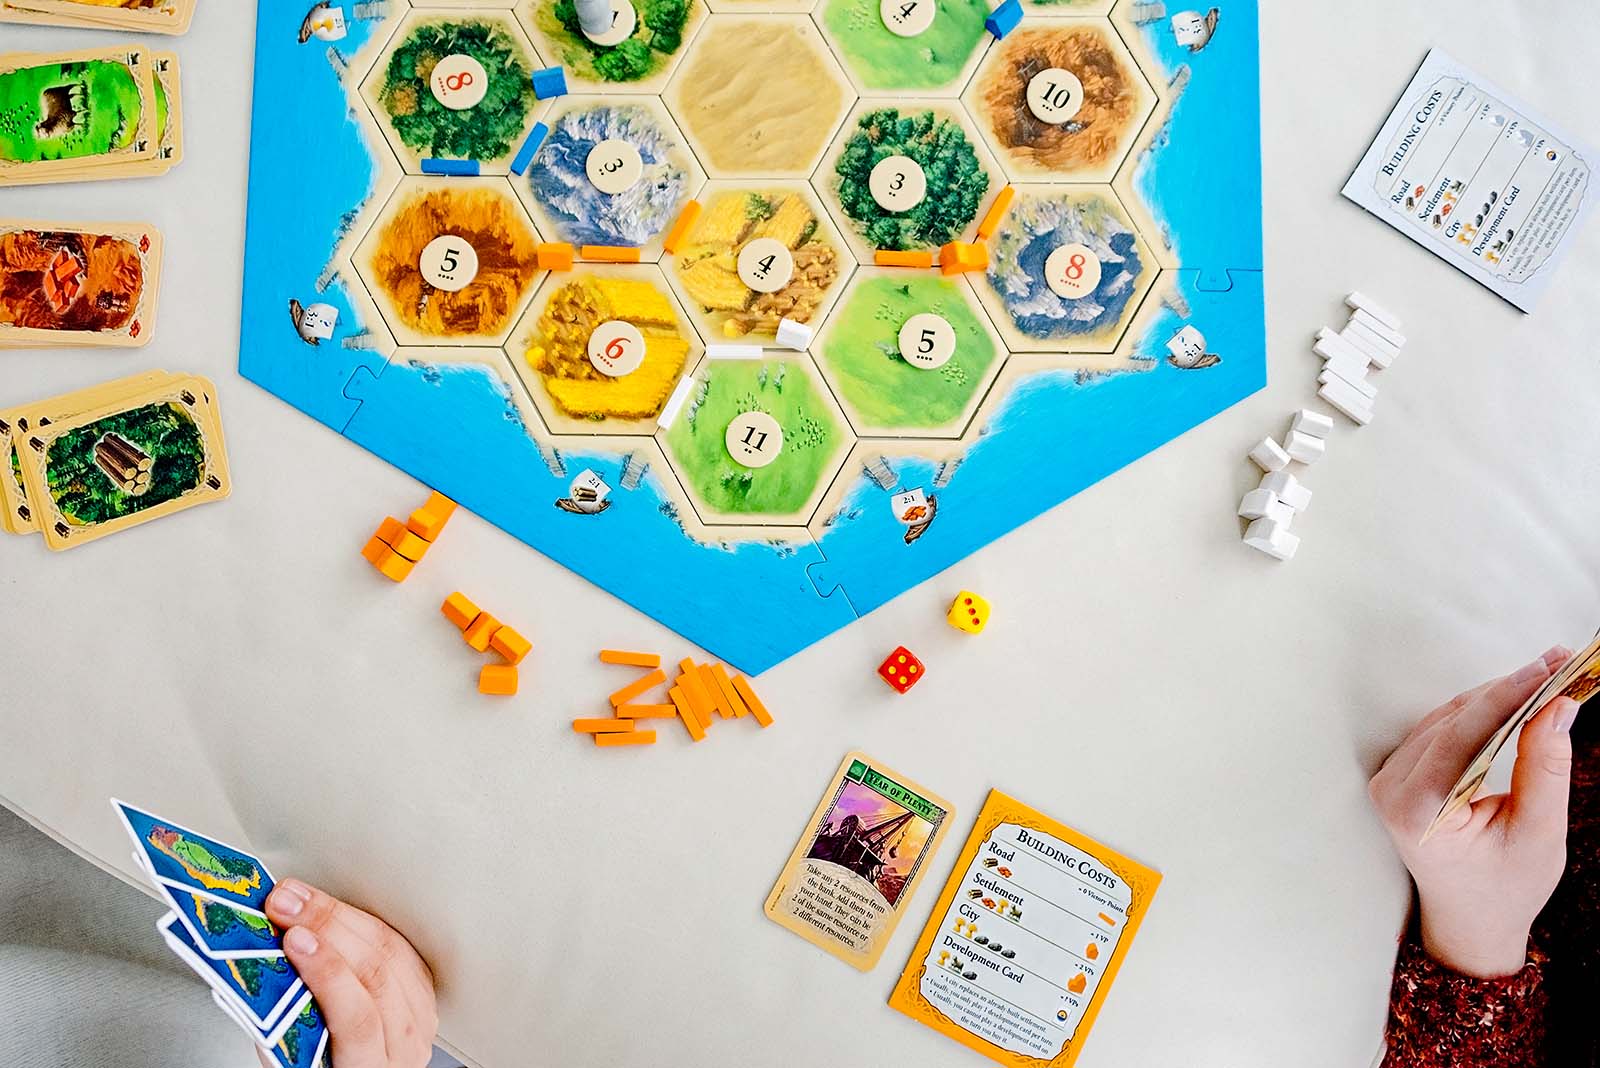 CATAN Boardgame by Klaus Teuber